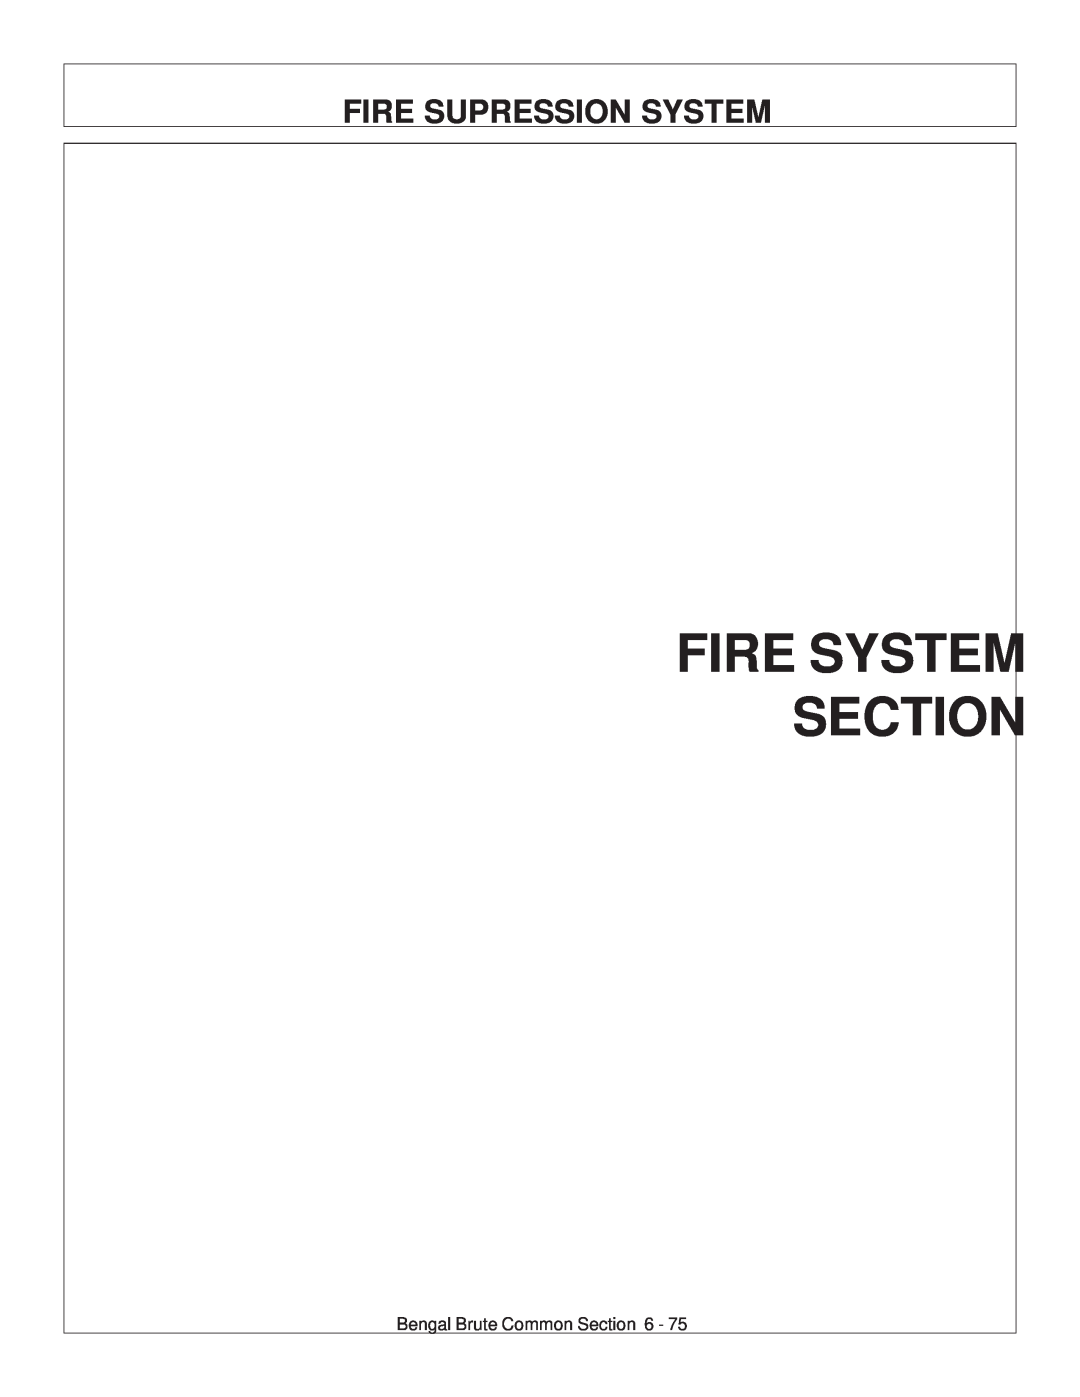 Tiger JD 62-6420 manual Fire System Section, Fire Supression System 